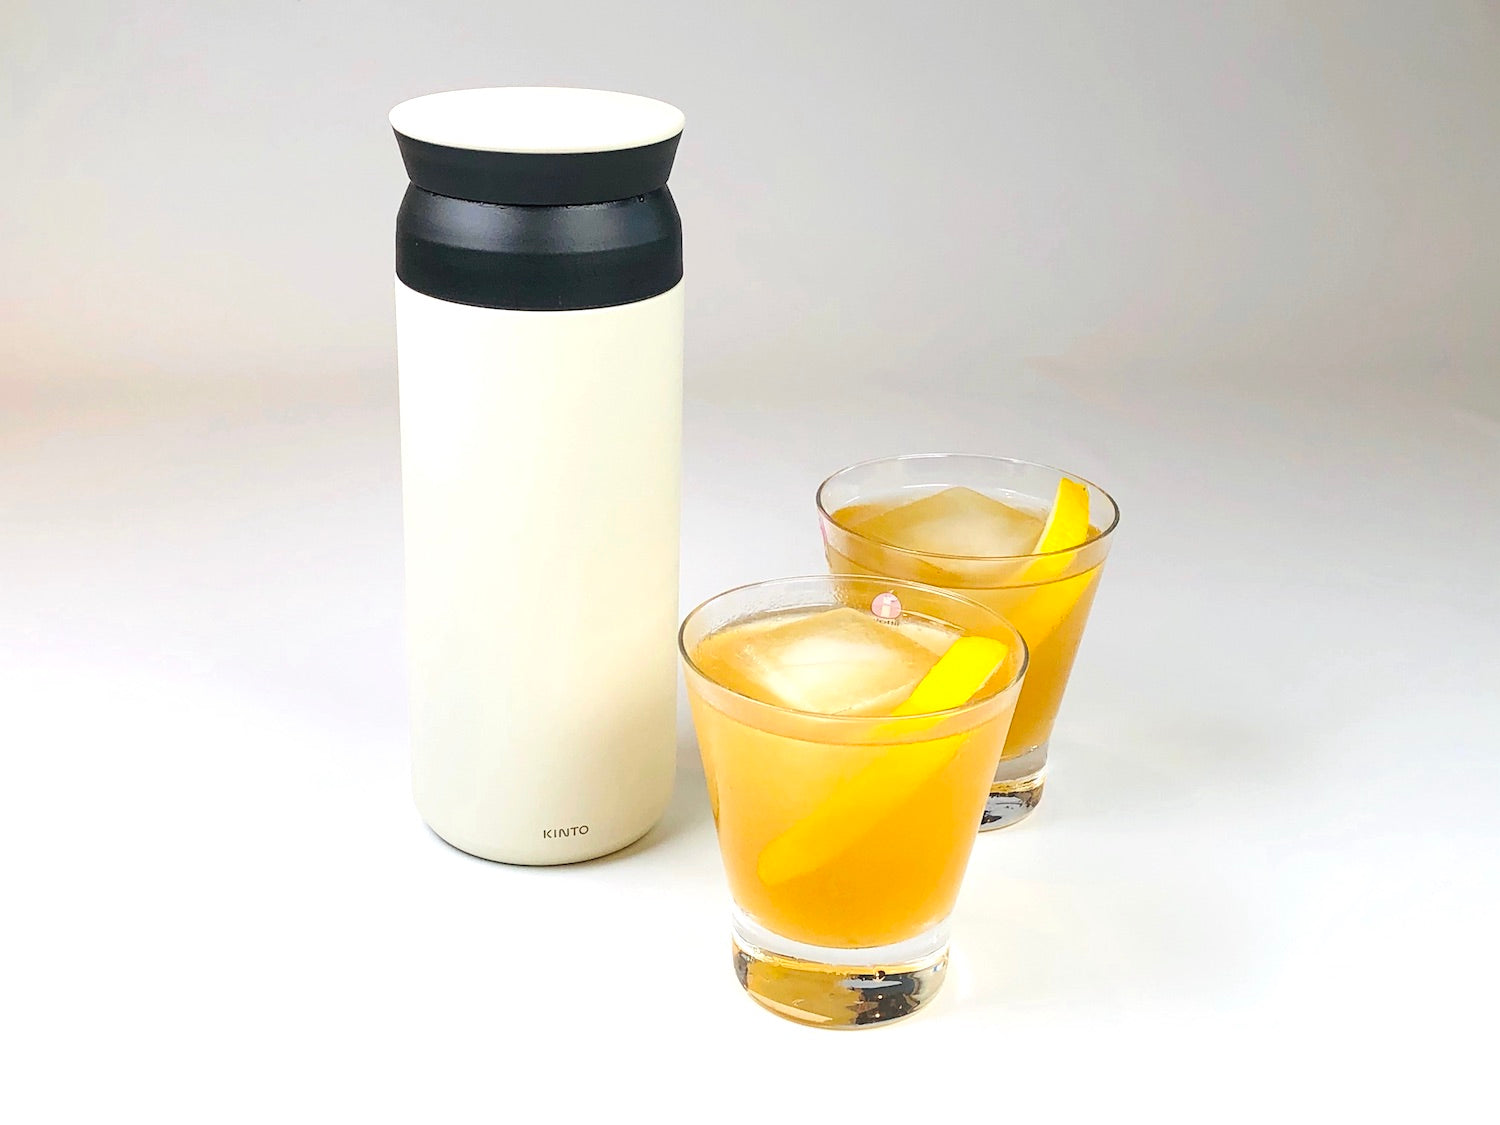 Kinto Travel Tumbler and Cocktails